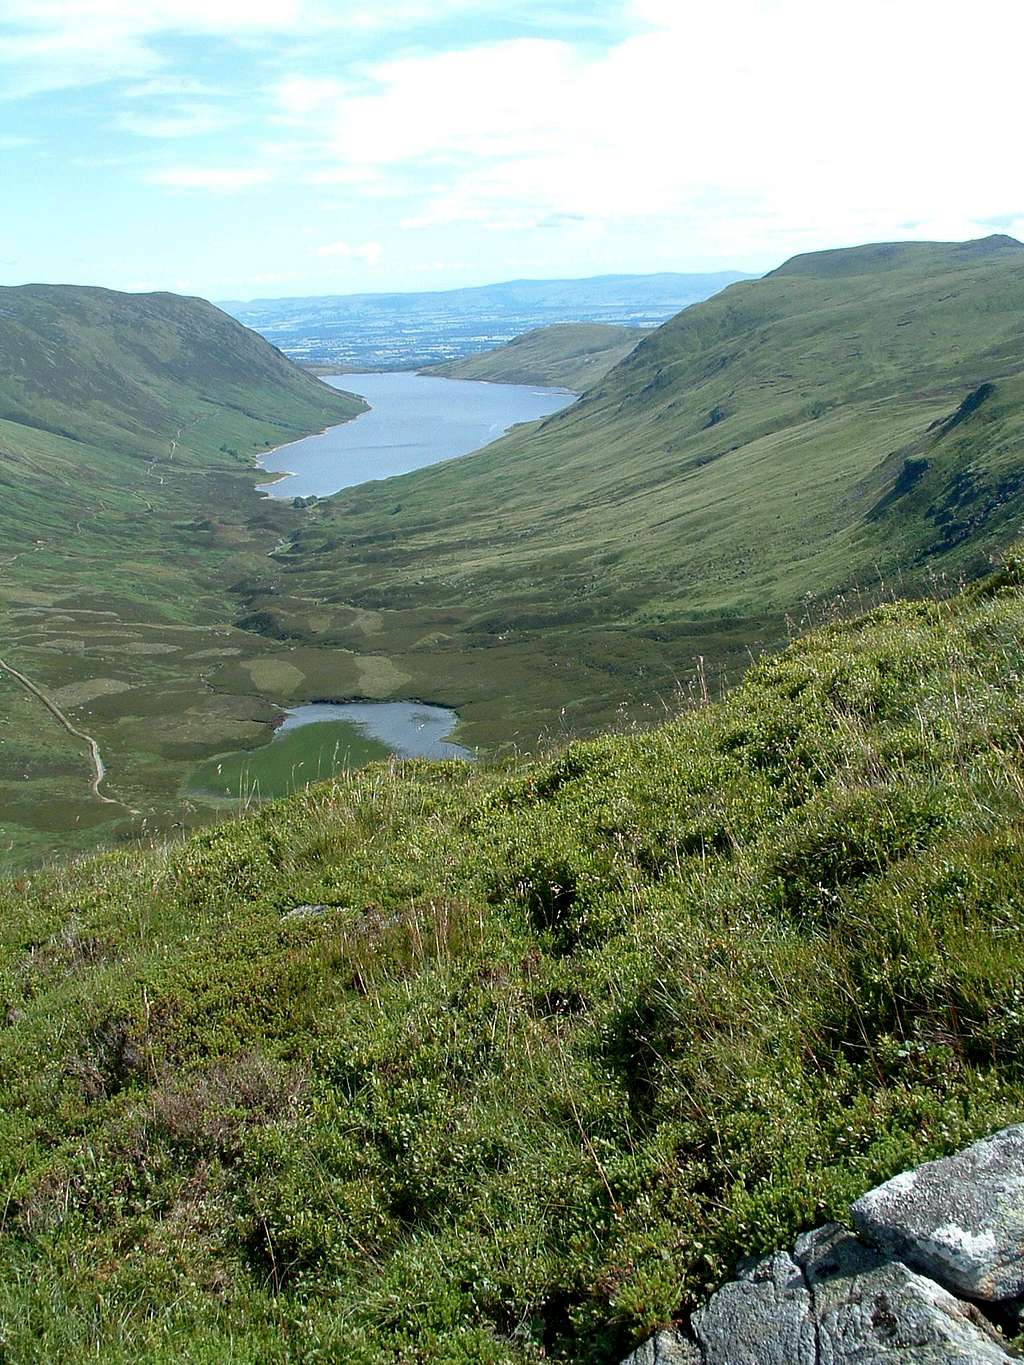 Looking back down and into the loch